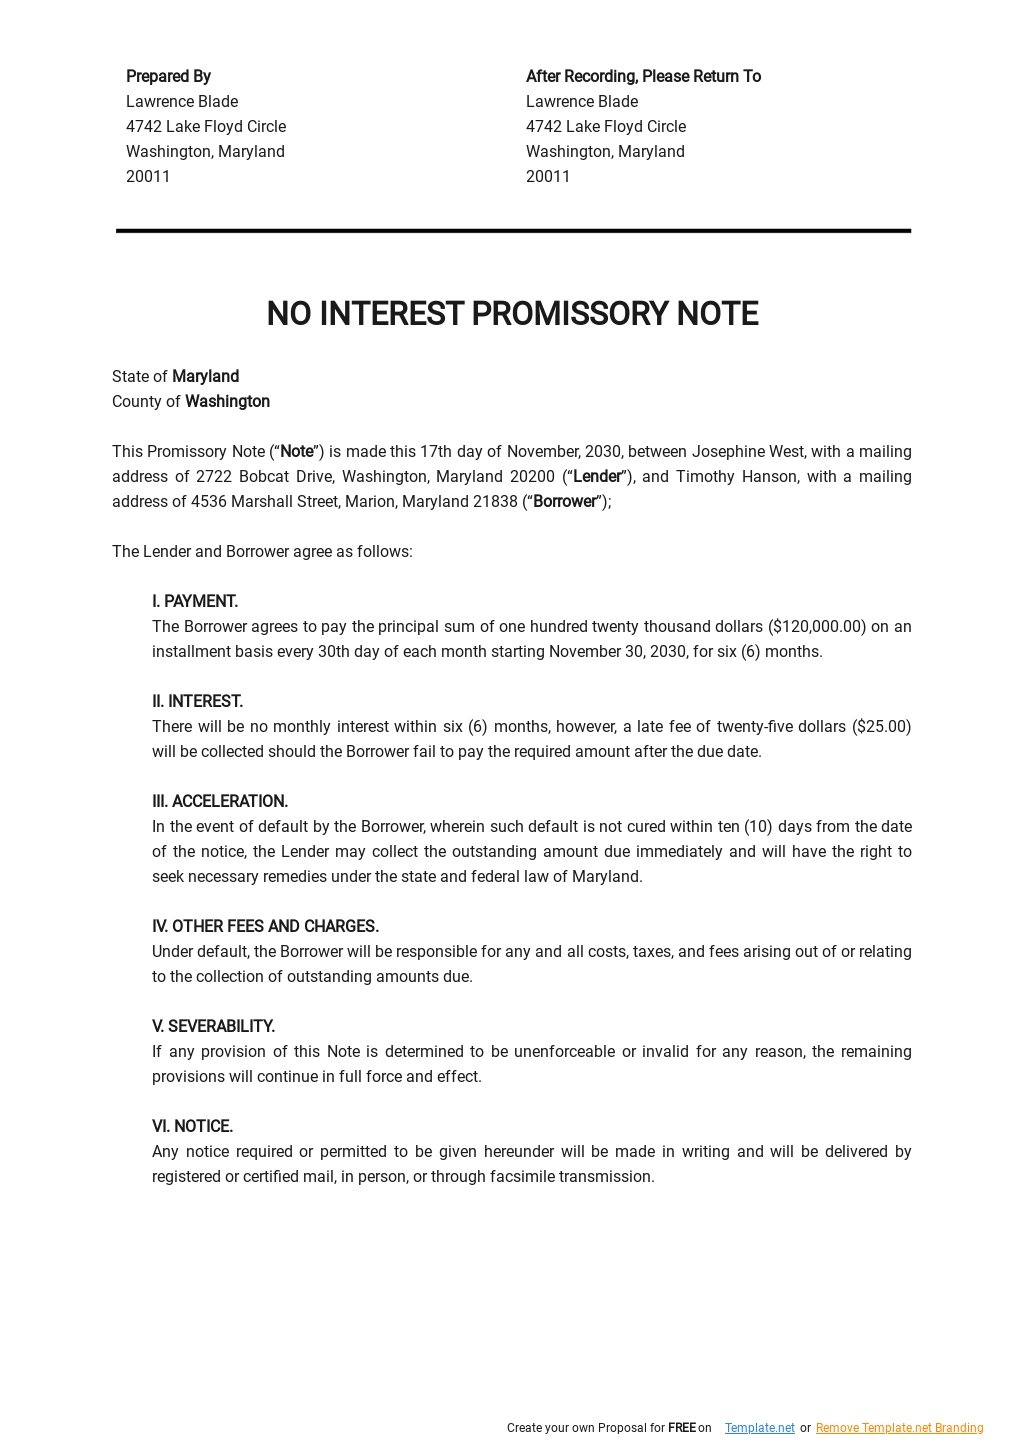 Promissory Note Template No Interest